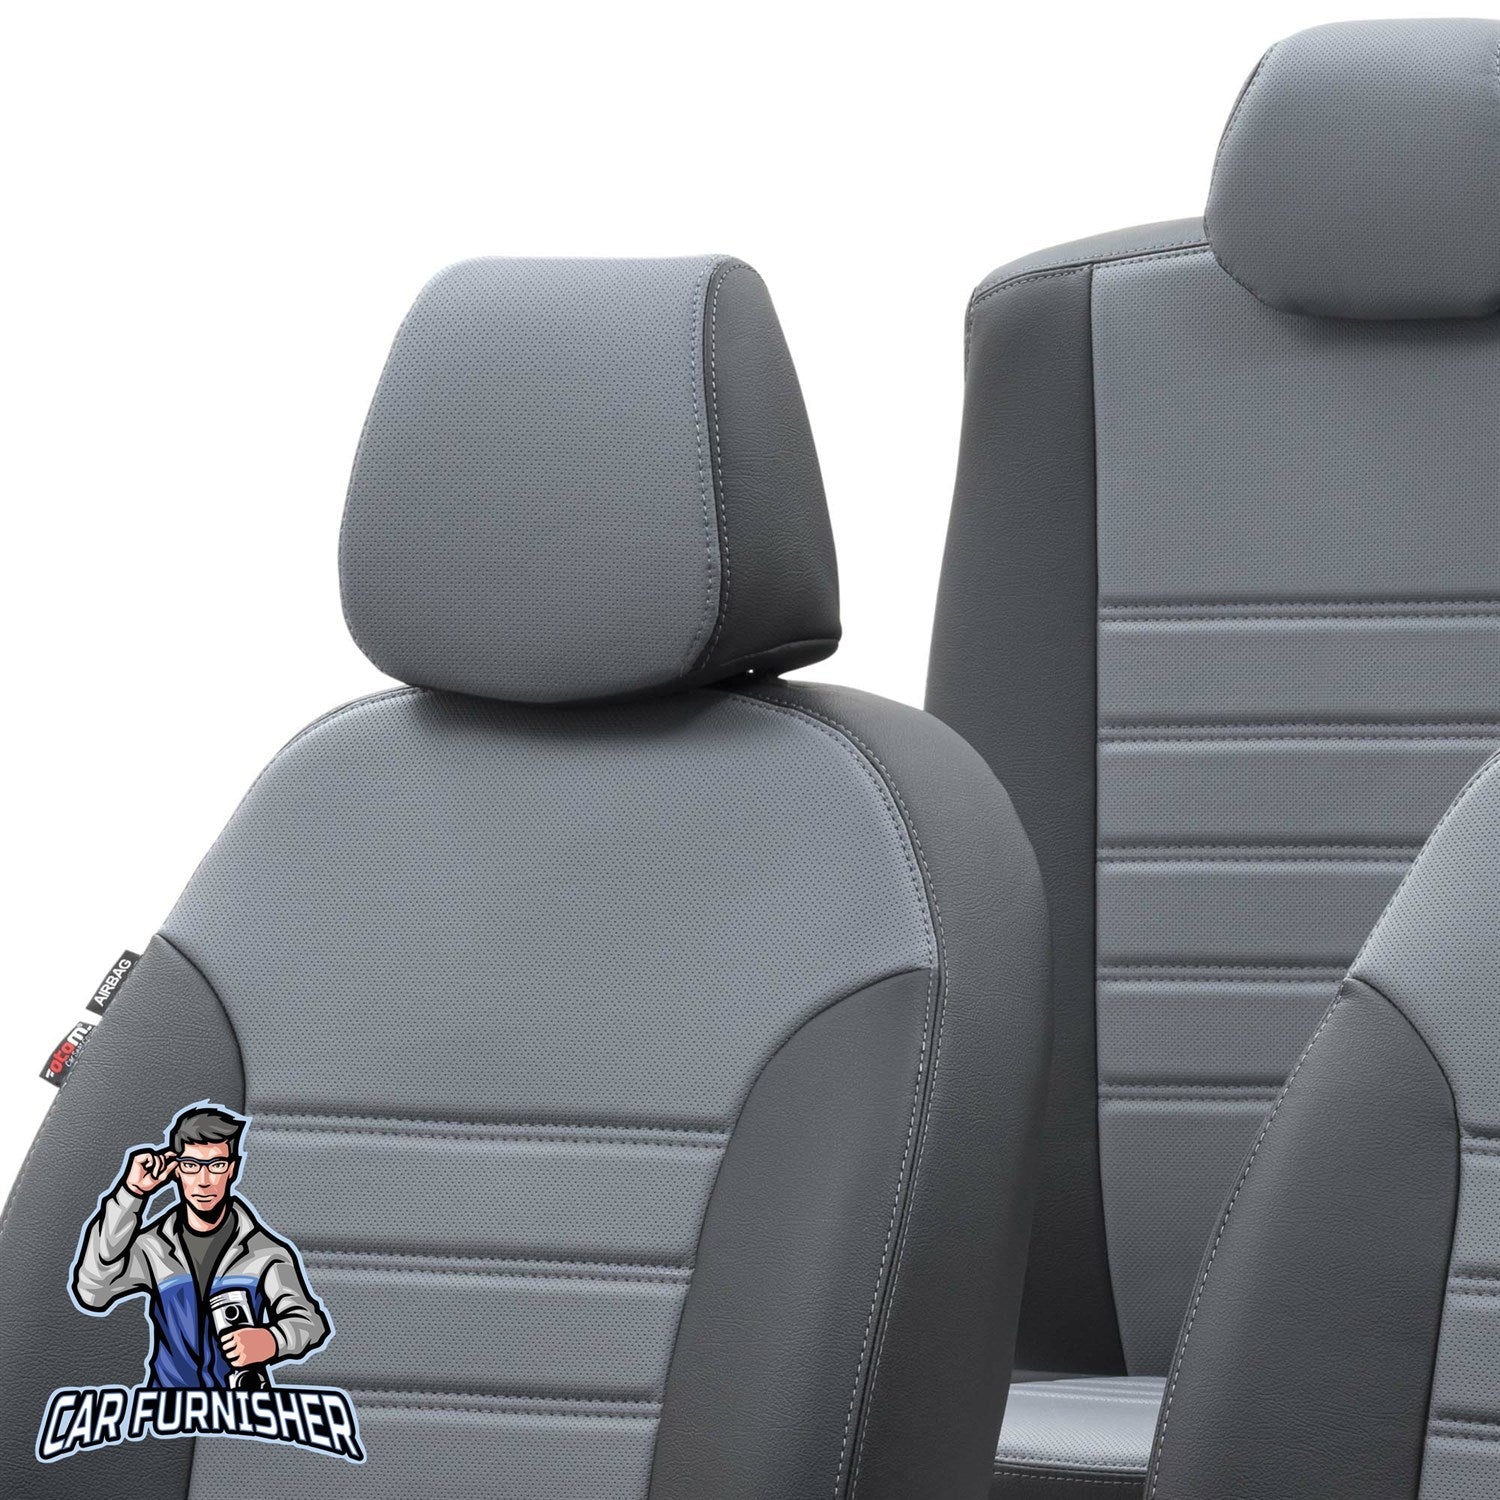 Peugeot 206 Car Seat Covers 1999-2012 Istanbul Design Smoked Black Full Set (5 Seats + Handrest) Leather & Fabric